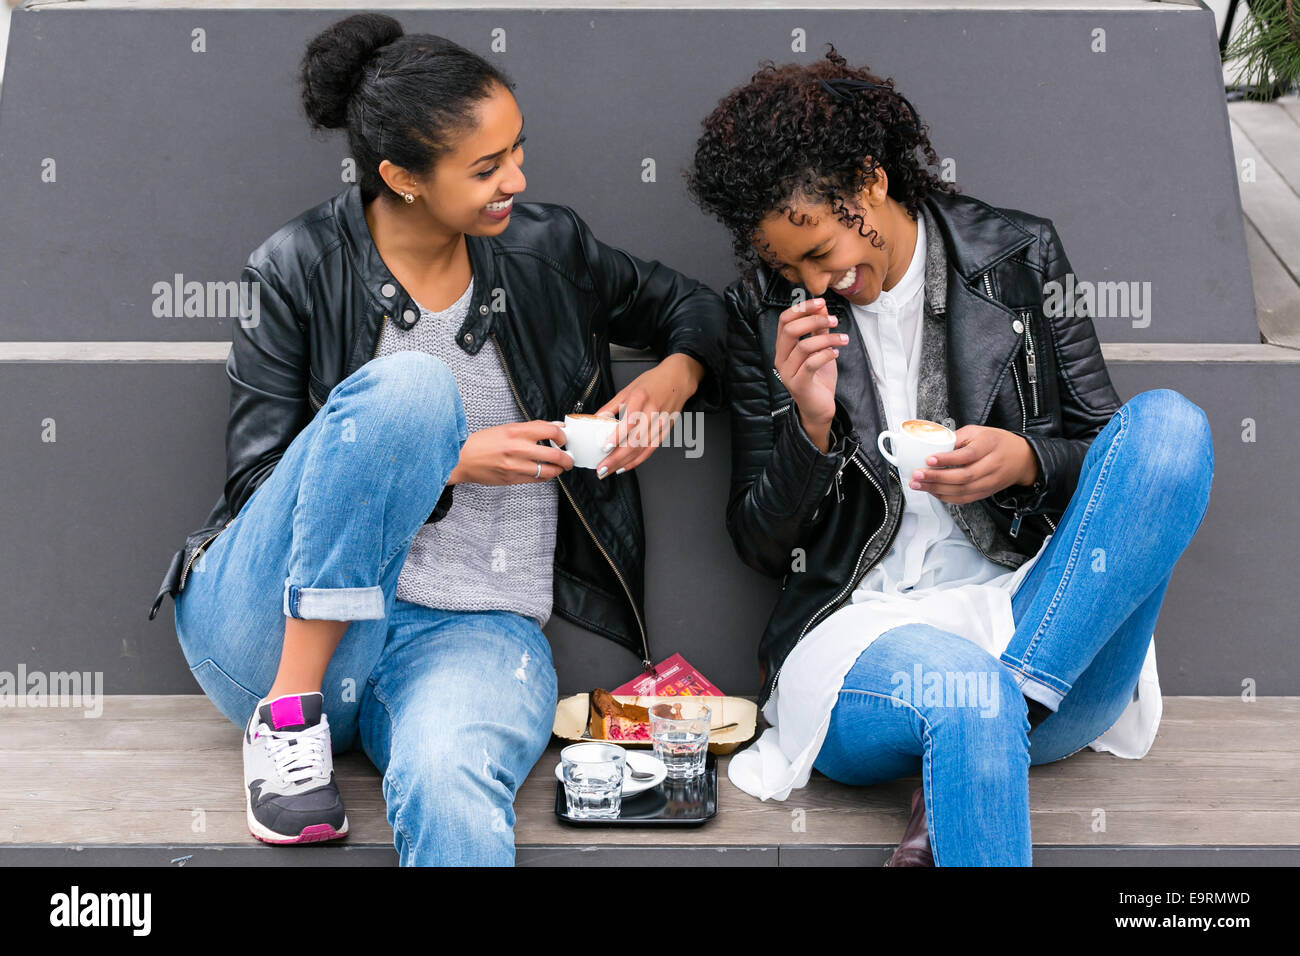 Two north African teen friends drinking together coffee outside Stock Photo